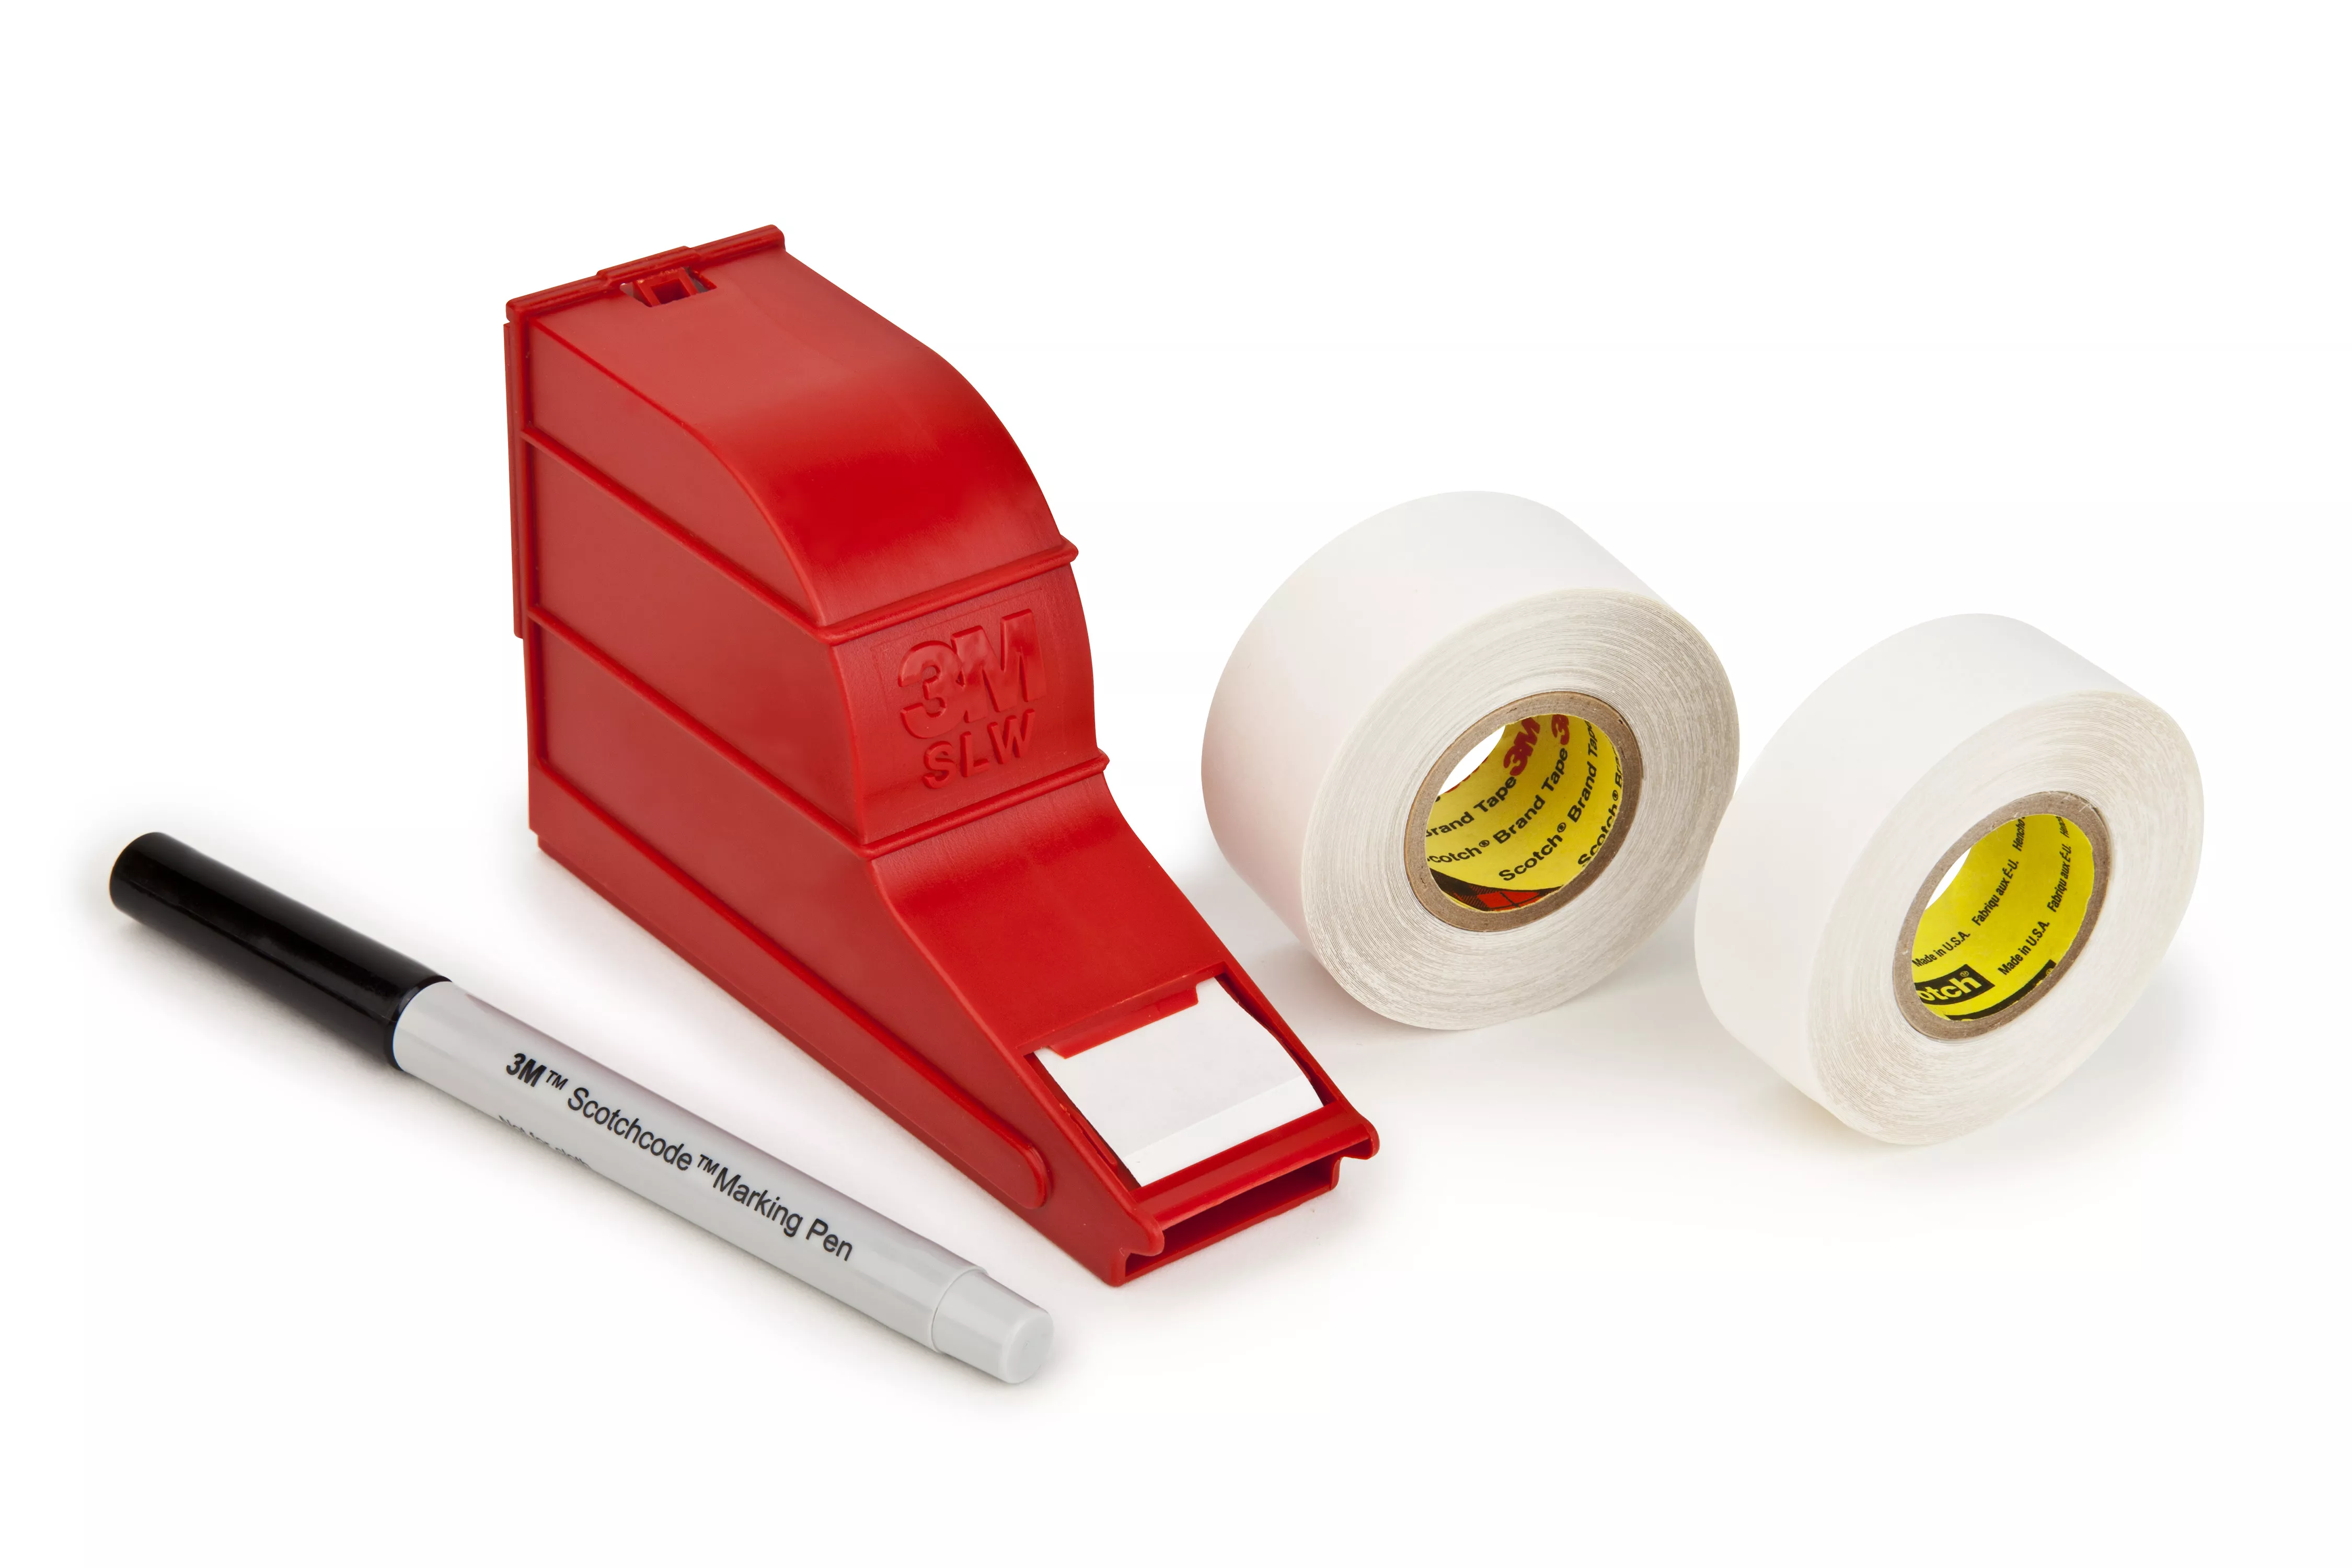 3M™ ScotchCode™ Wire Marker Write-On Dispenser with Tape and Pen SWD,
0.75 in x 1.375 in, 10/Case